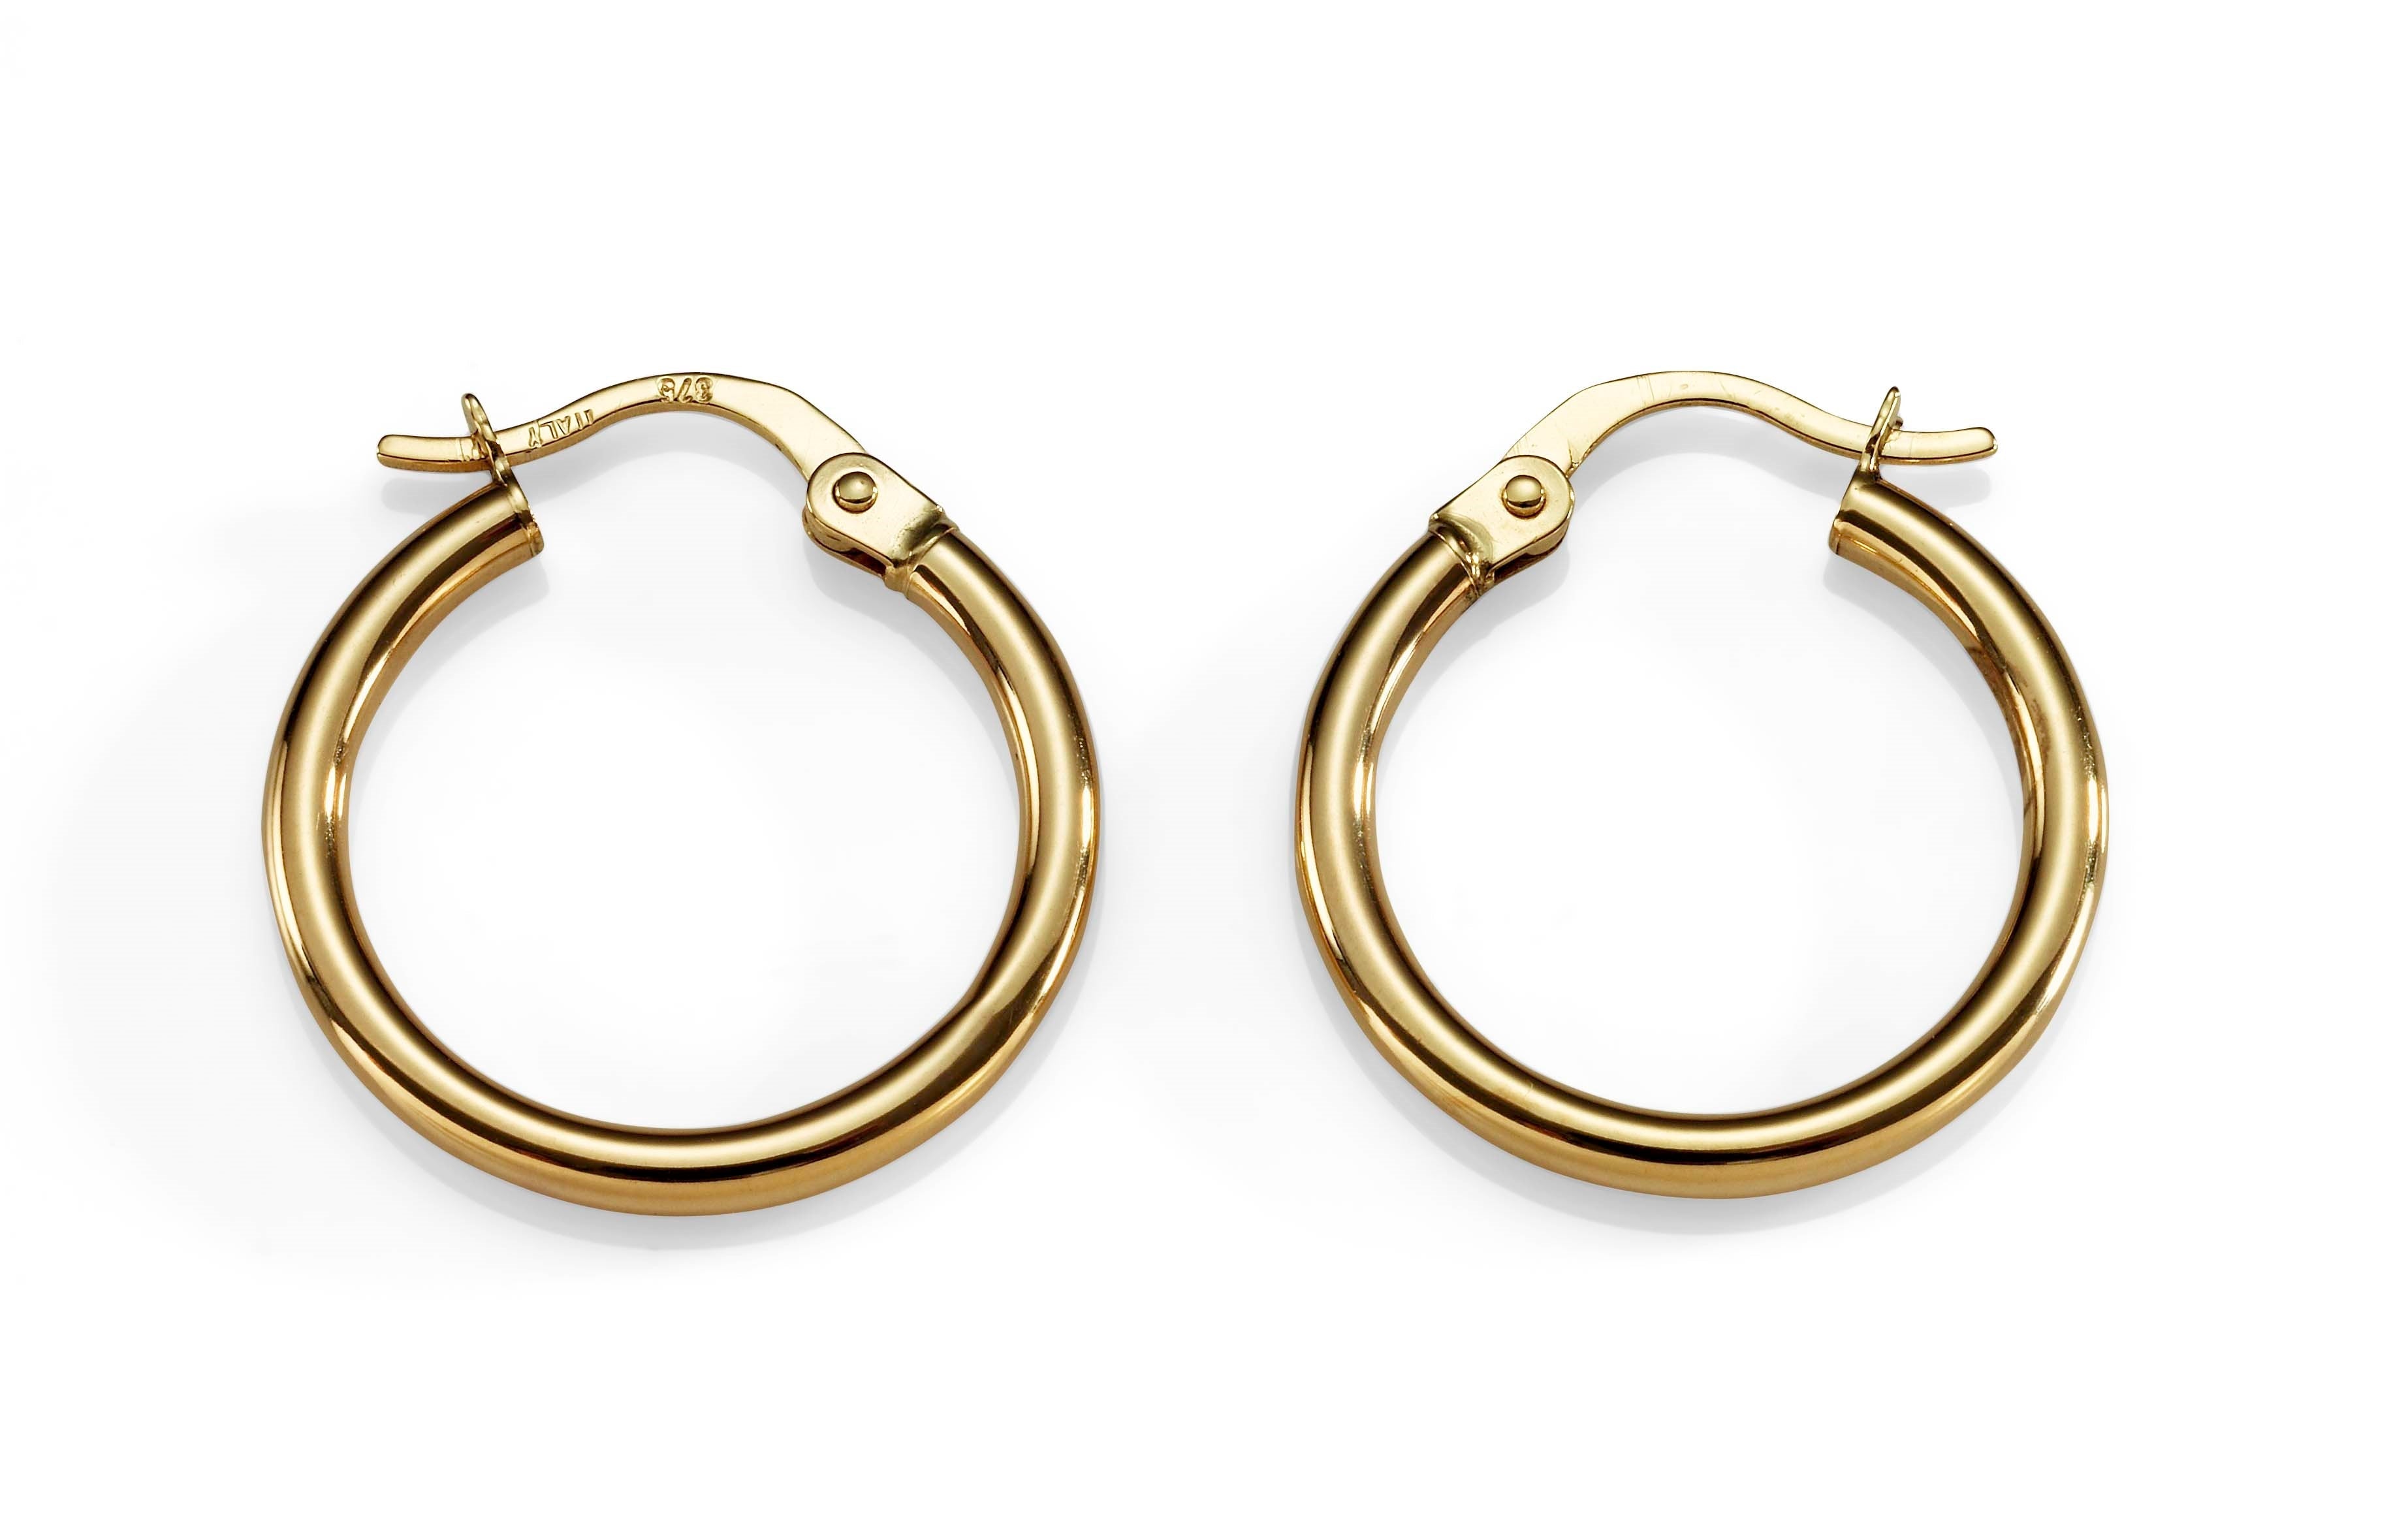 9ct gold polished hoops 15mm